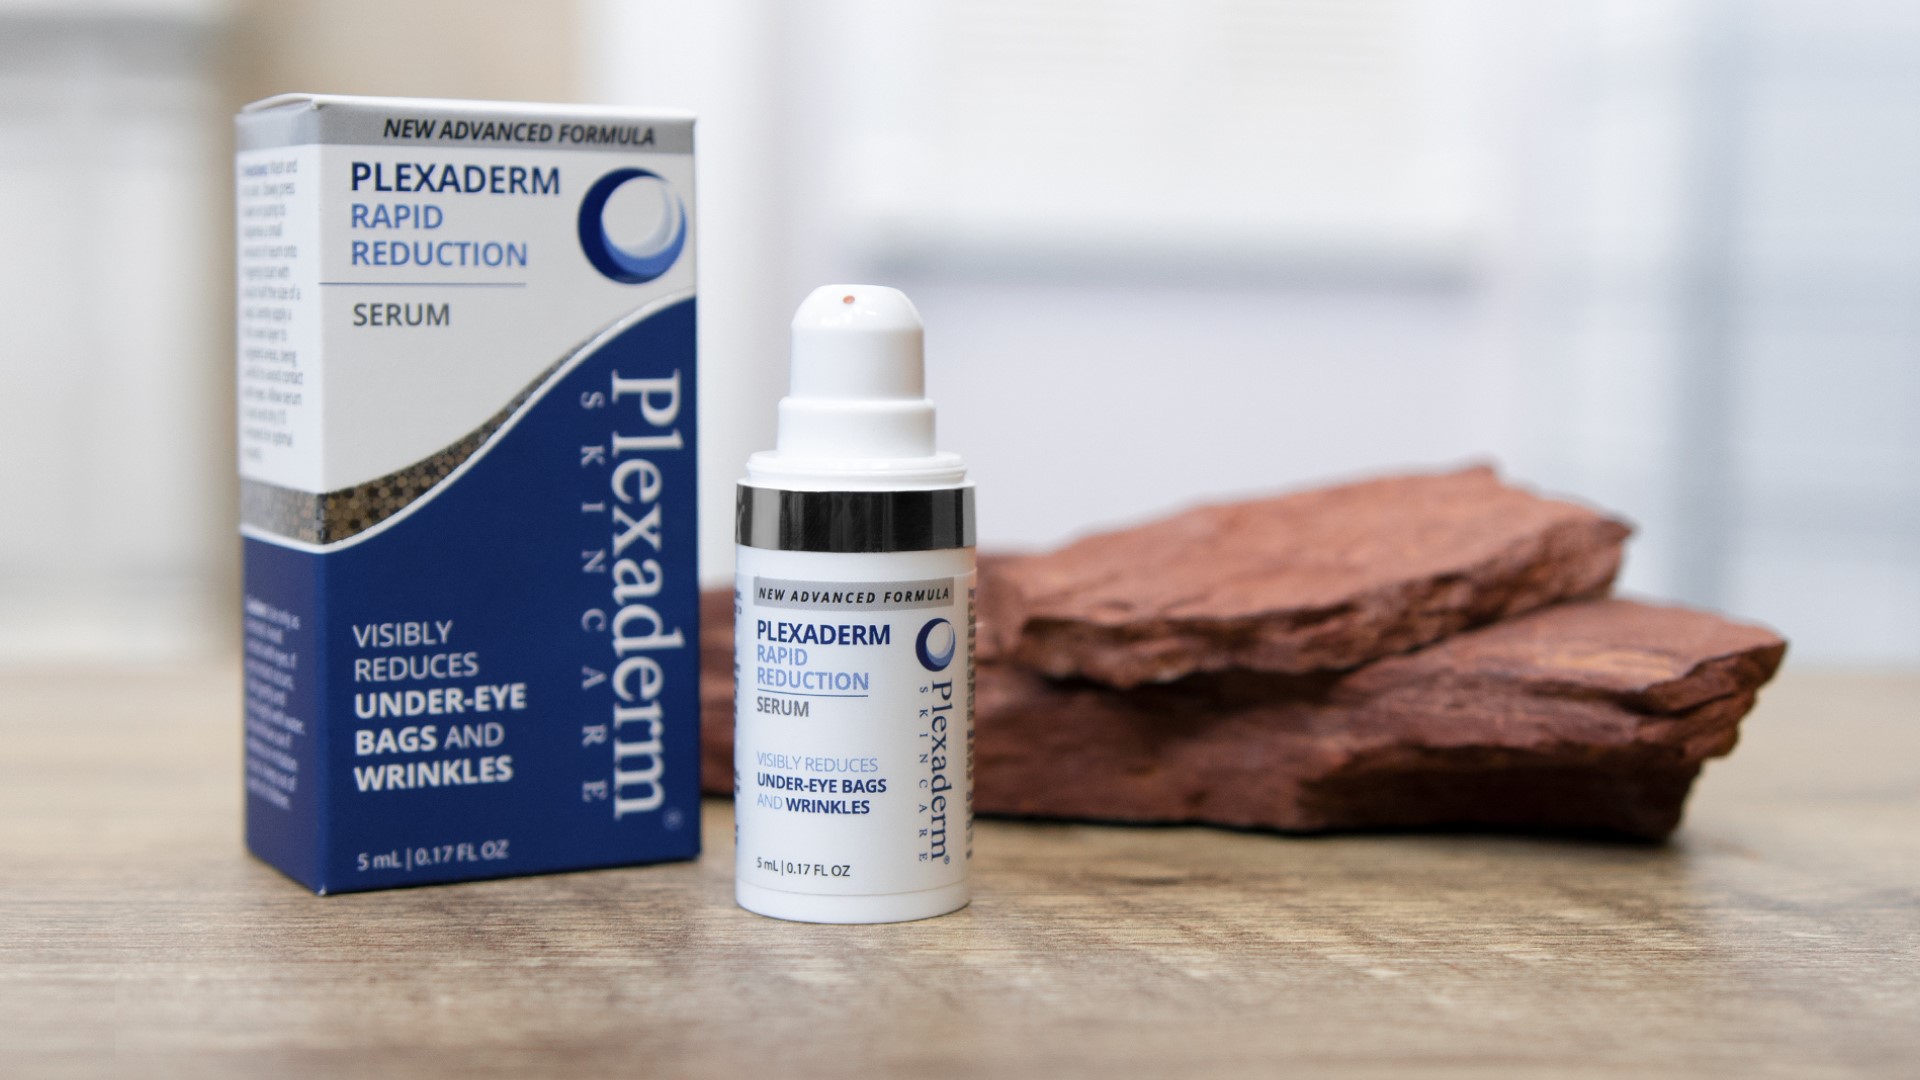 See how Plexaderm can help reduce eye bags in minutes.